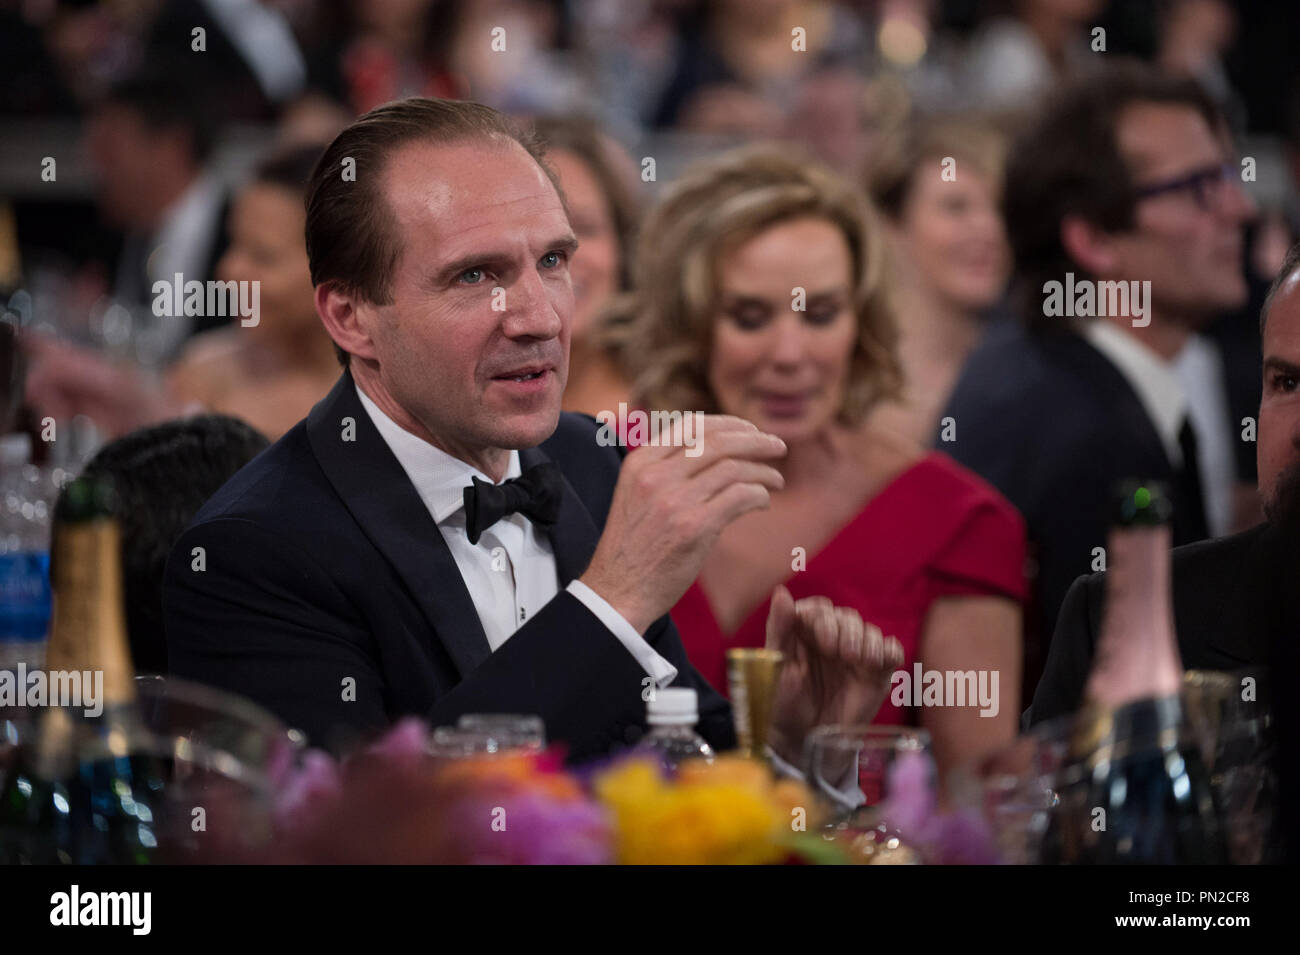 Nominated for BEST PERFORMANCE BY AN ACTOR IN A MOTION PICTURE – COMEDY OR MUSICAL for his role in “THE GRAND BUDAPEST HOTEL”, actor Ralph Fiennes Ralph Fiennes at the 72nd Annual Golden Globe Awards at the Beverly Hilton in Beverly Hills, CA on Sunday, January 11, 2015.  File Reference # 32536 609JRC  For Editorial Use Only -  All Rights Reserved Stock Photo